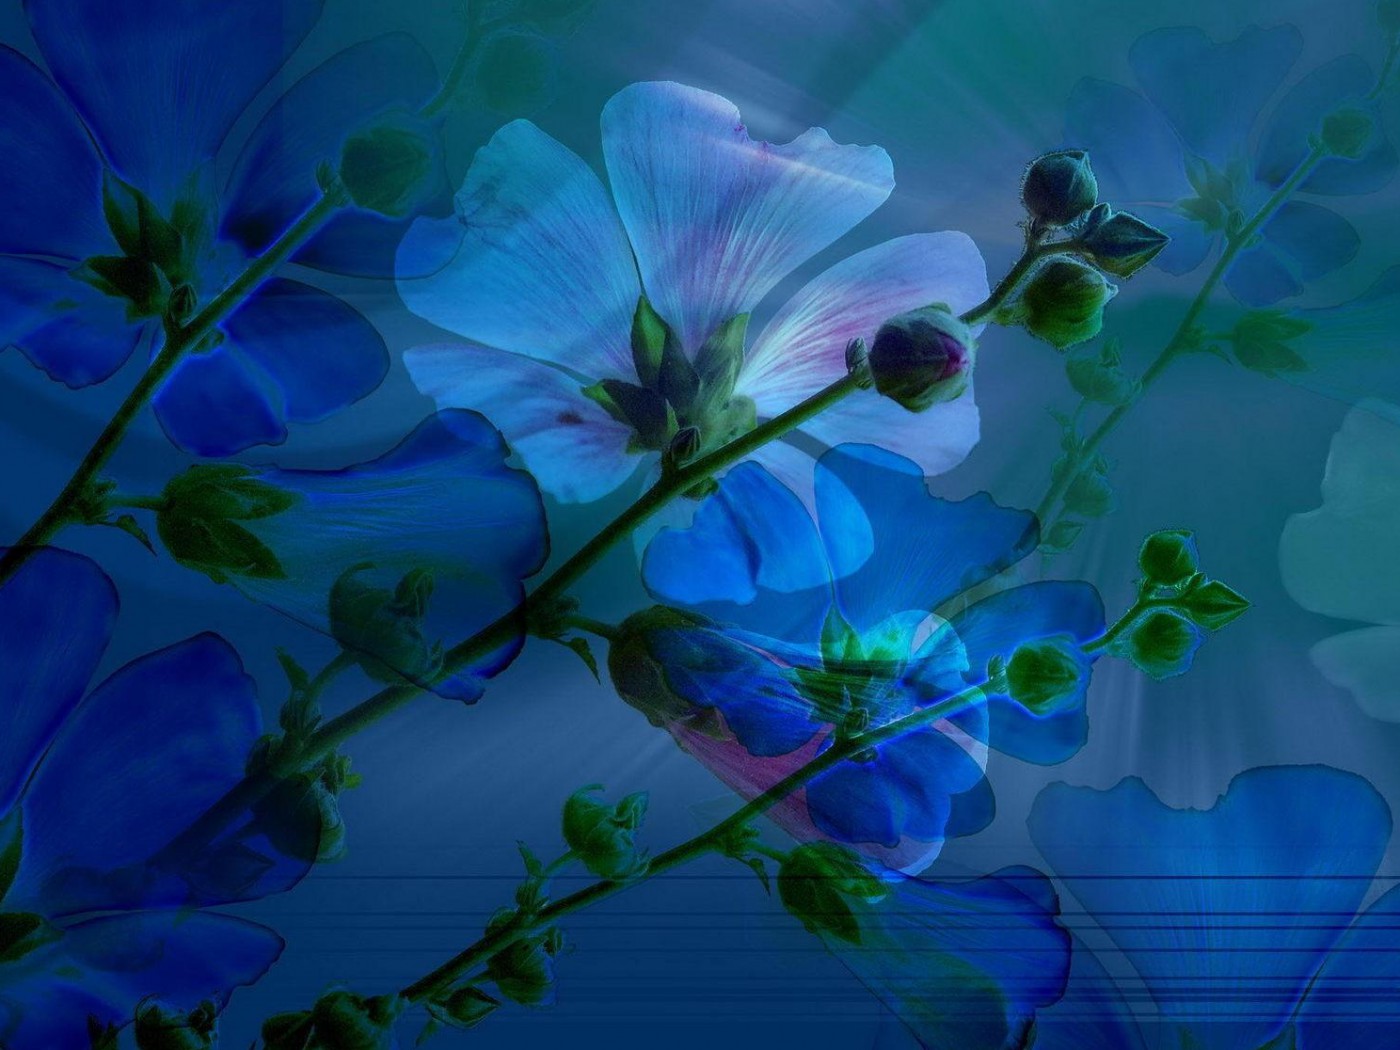 Blue Asters in 3D